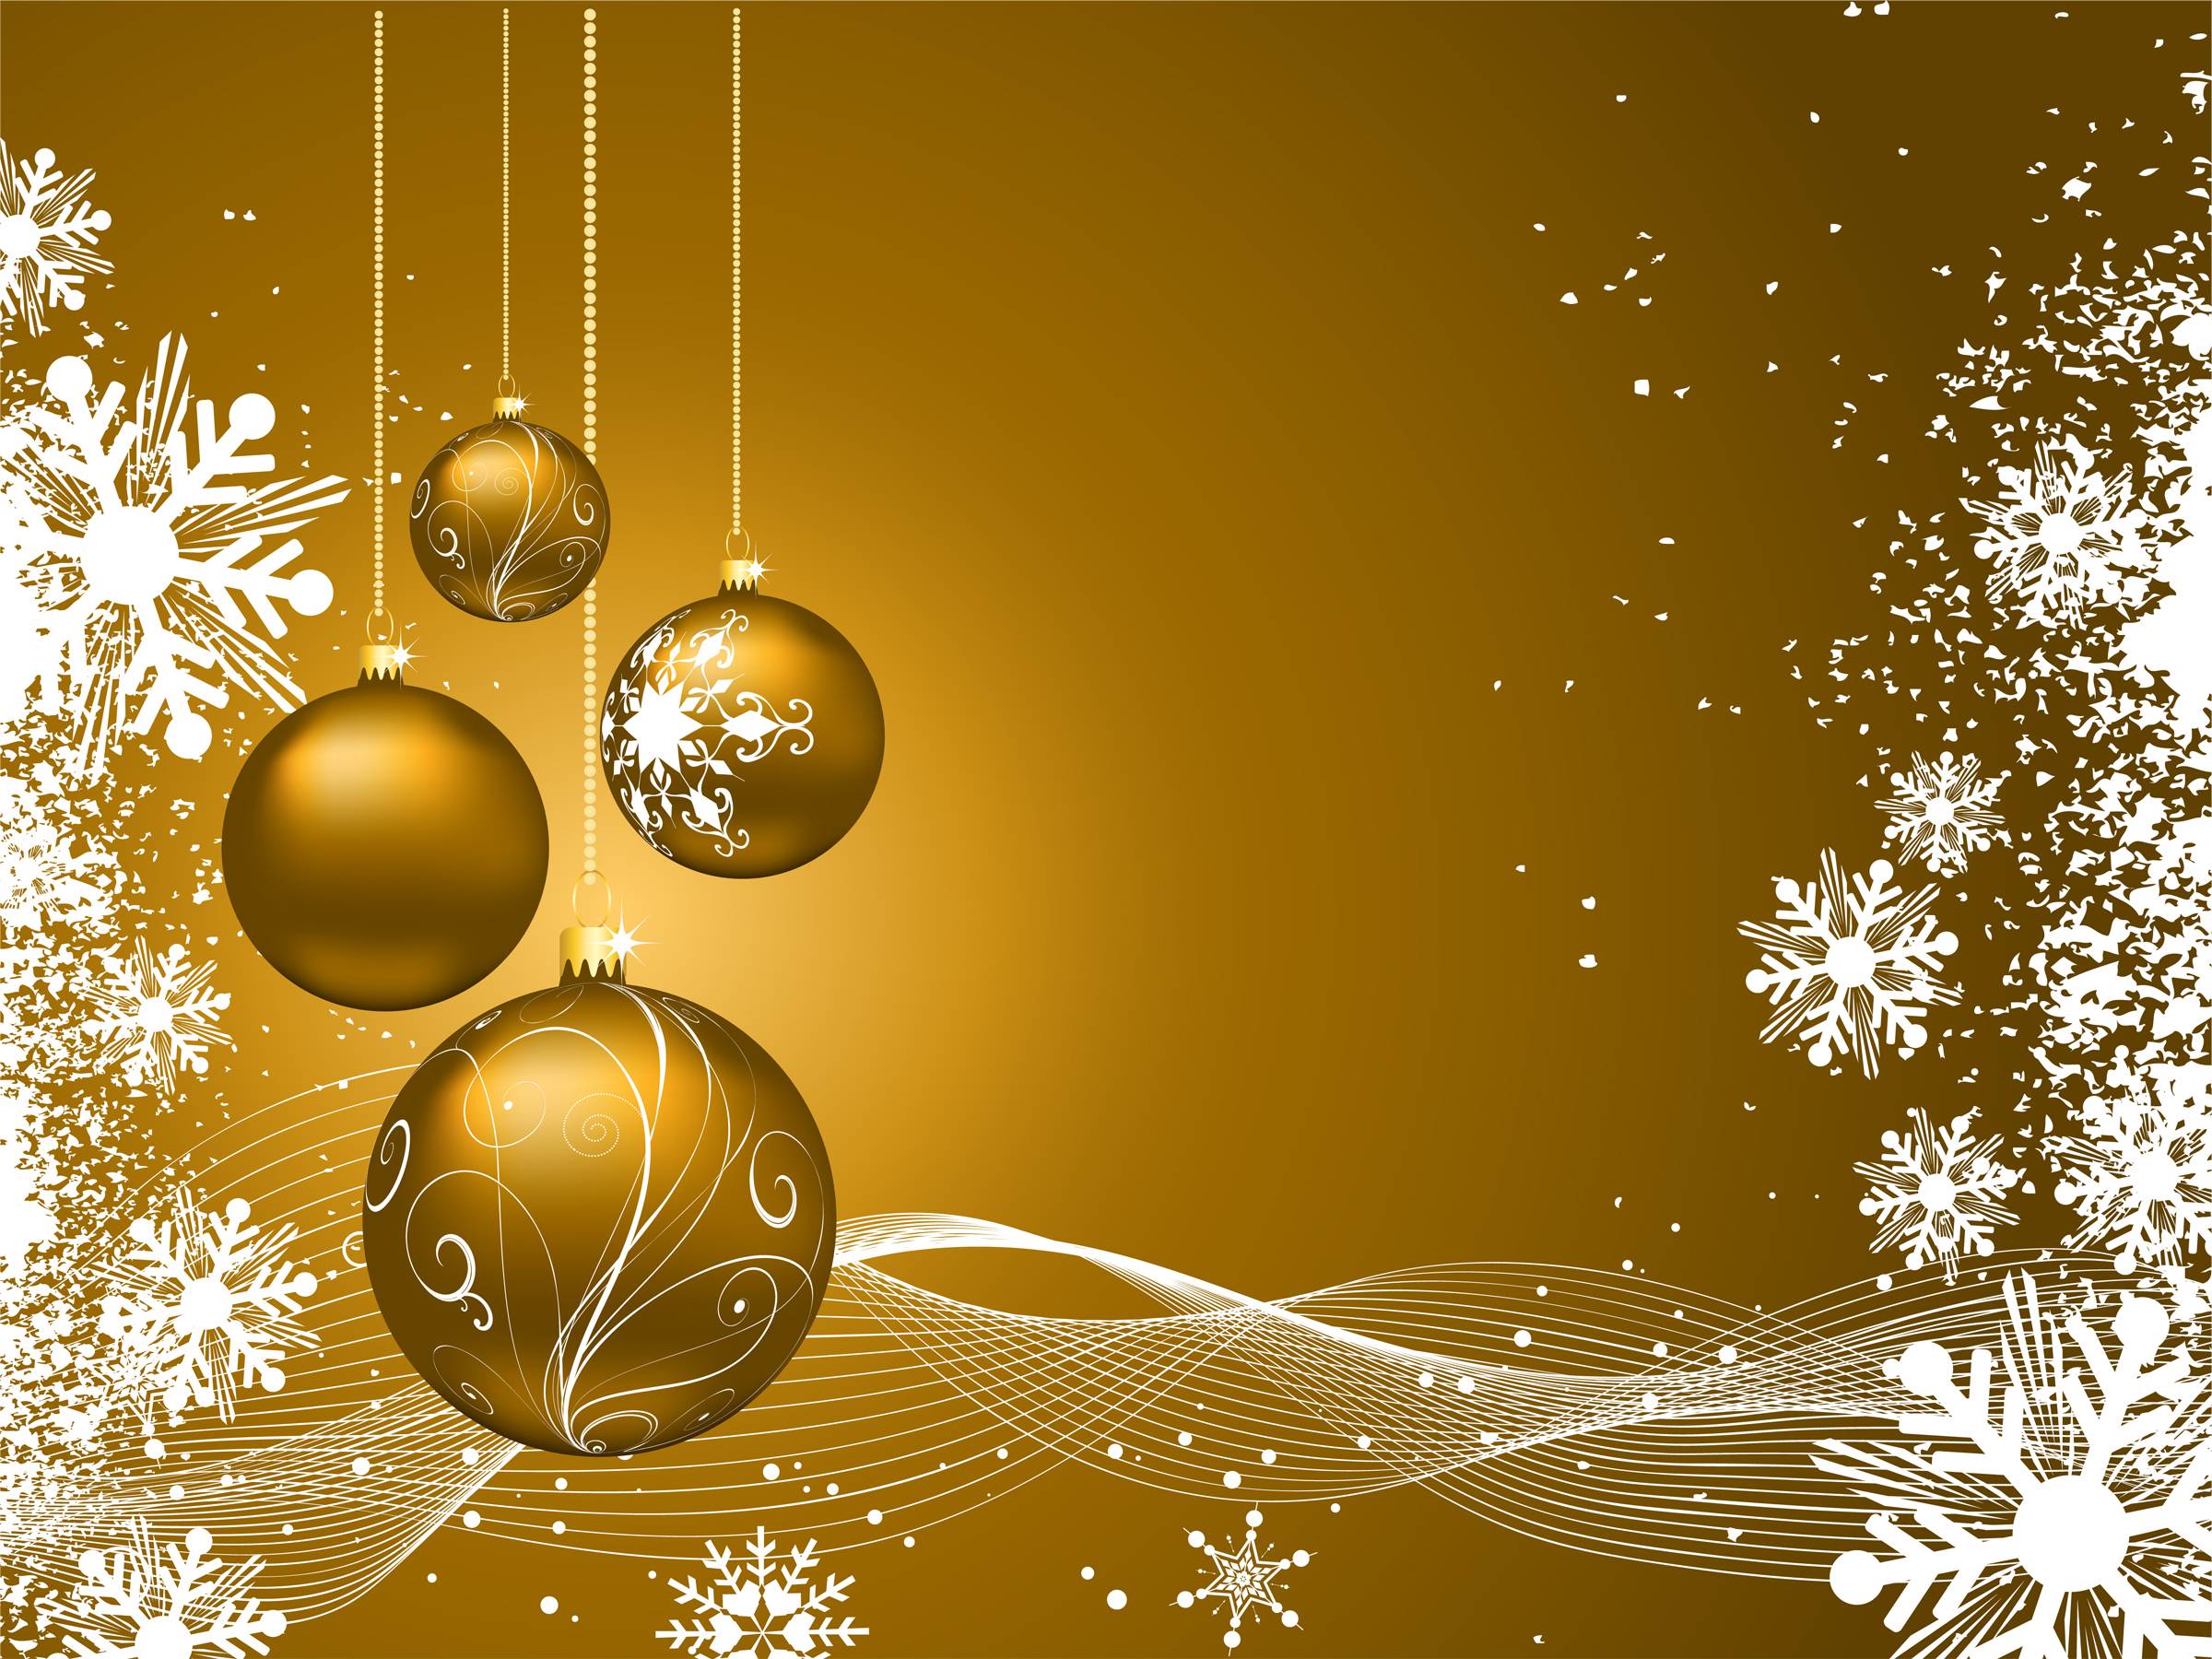 Christmas Banners Wallpapers - Wallpaper Cave